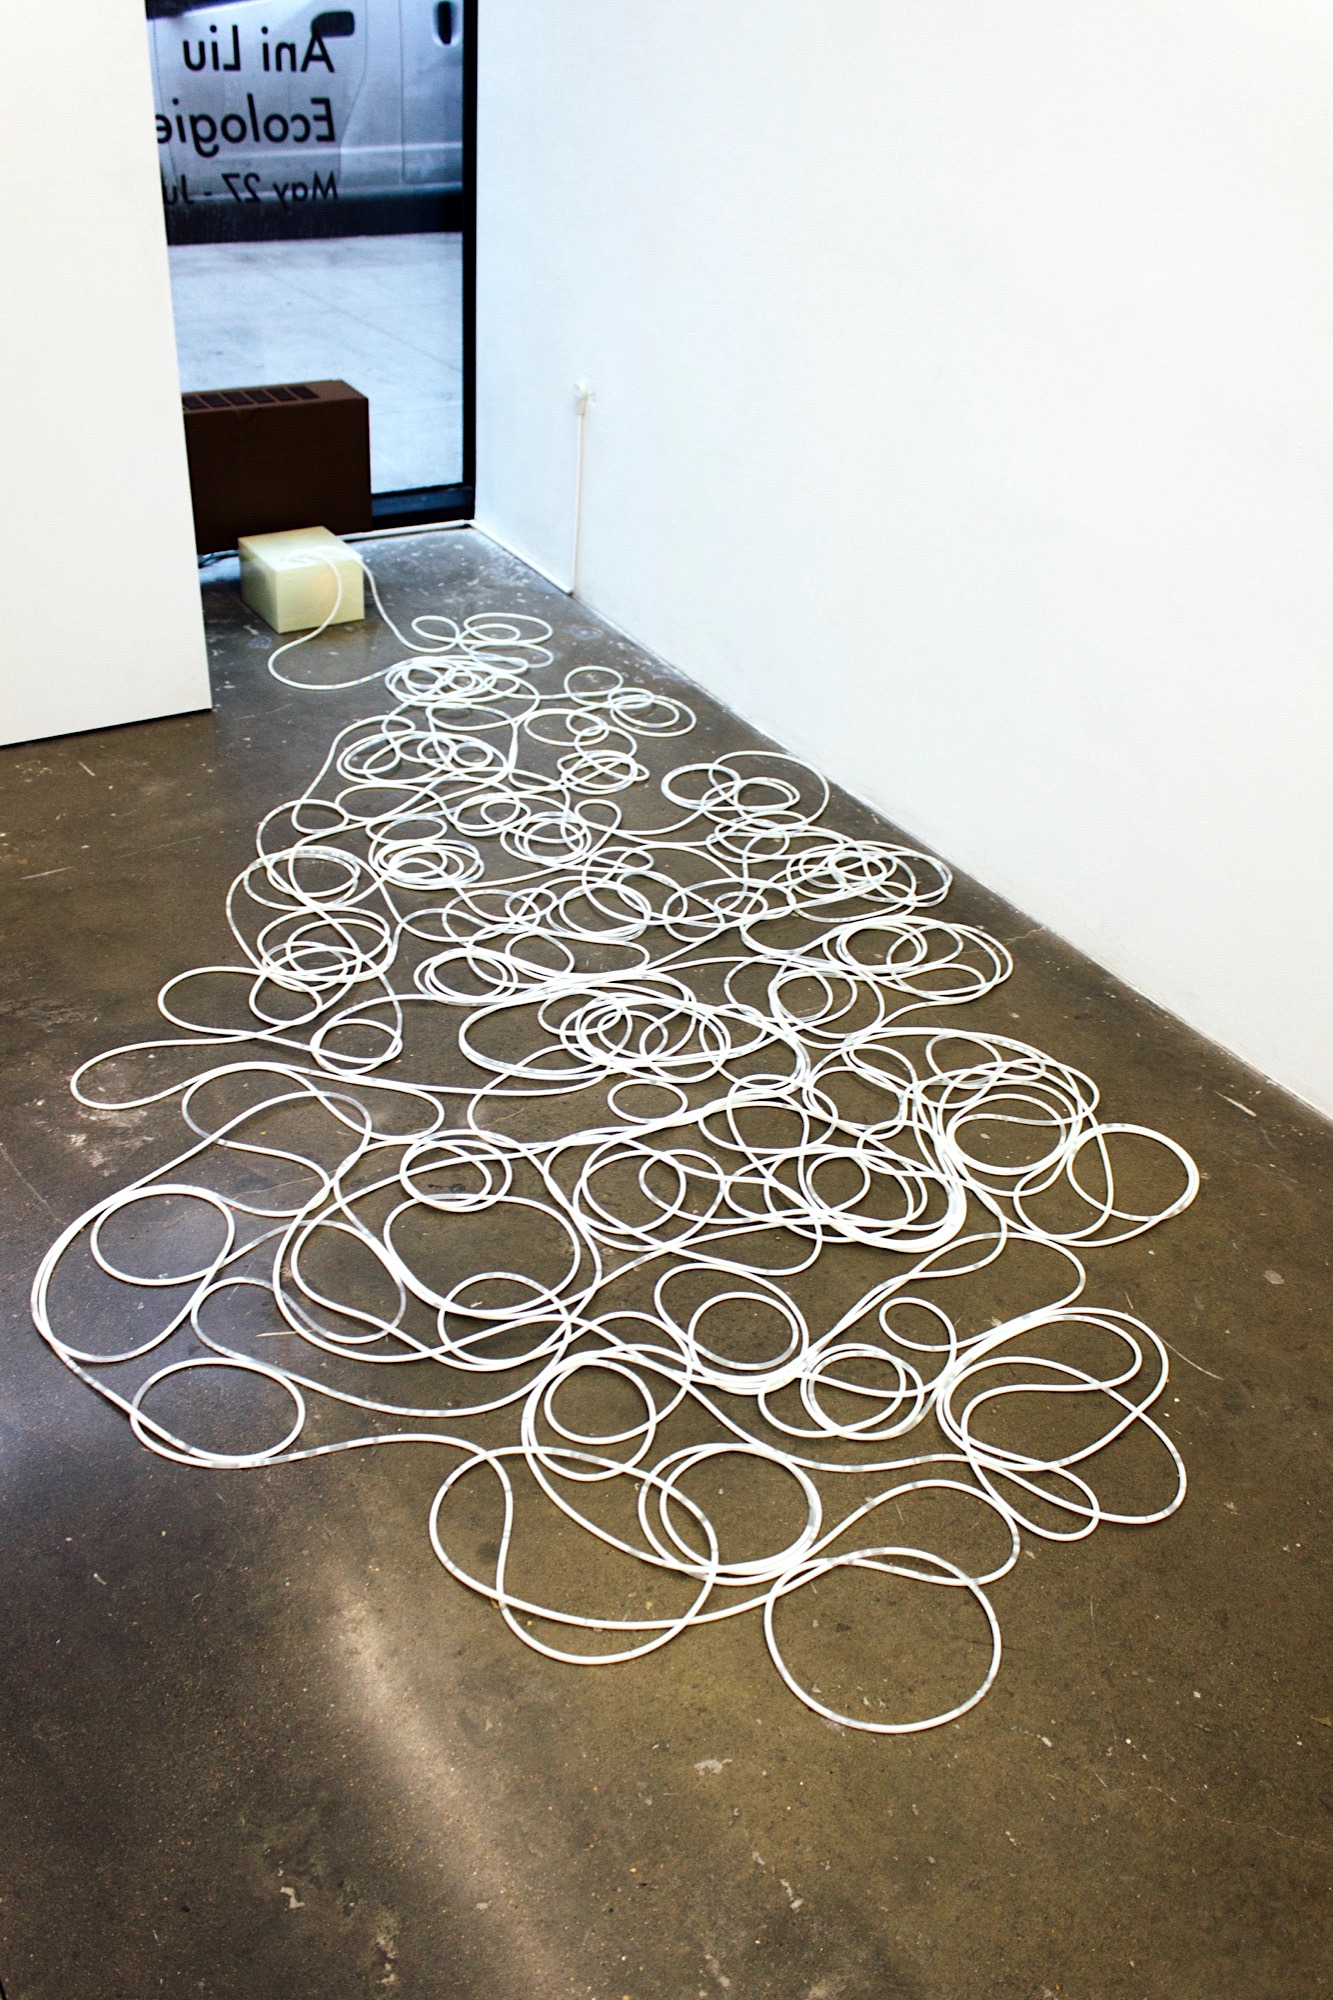 a huge coil and mess of thin tubing on a concrete floor filled with a white fluid